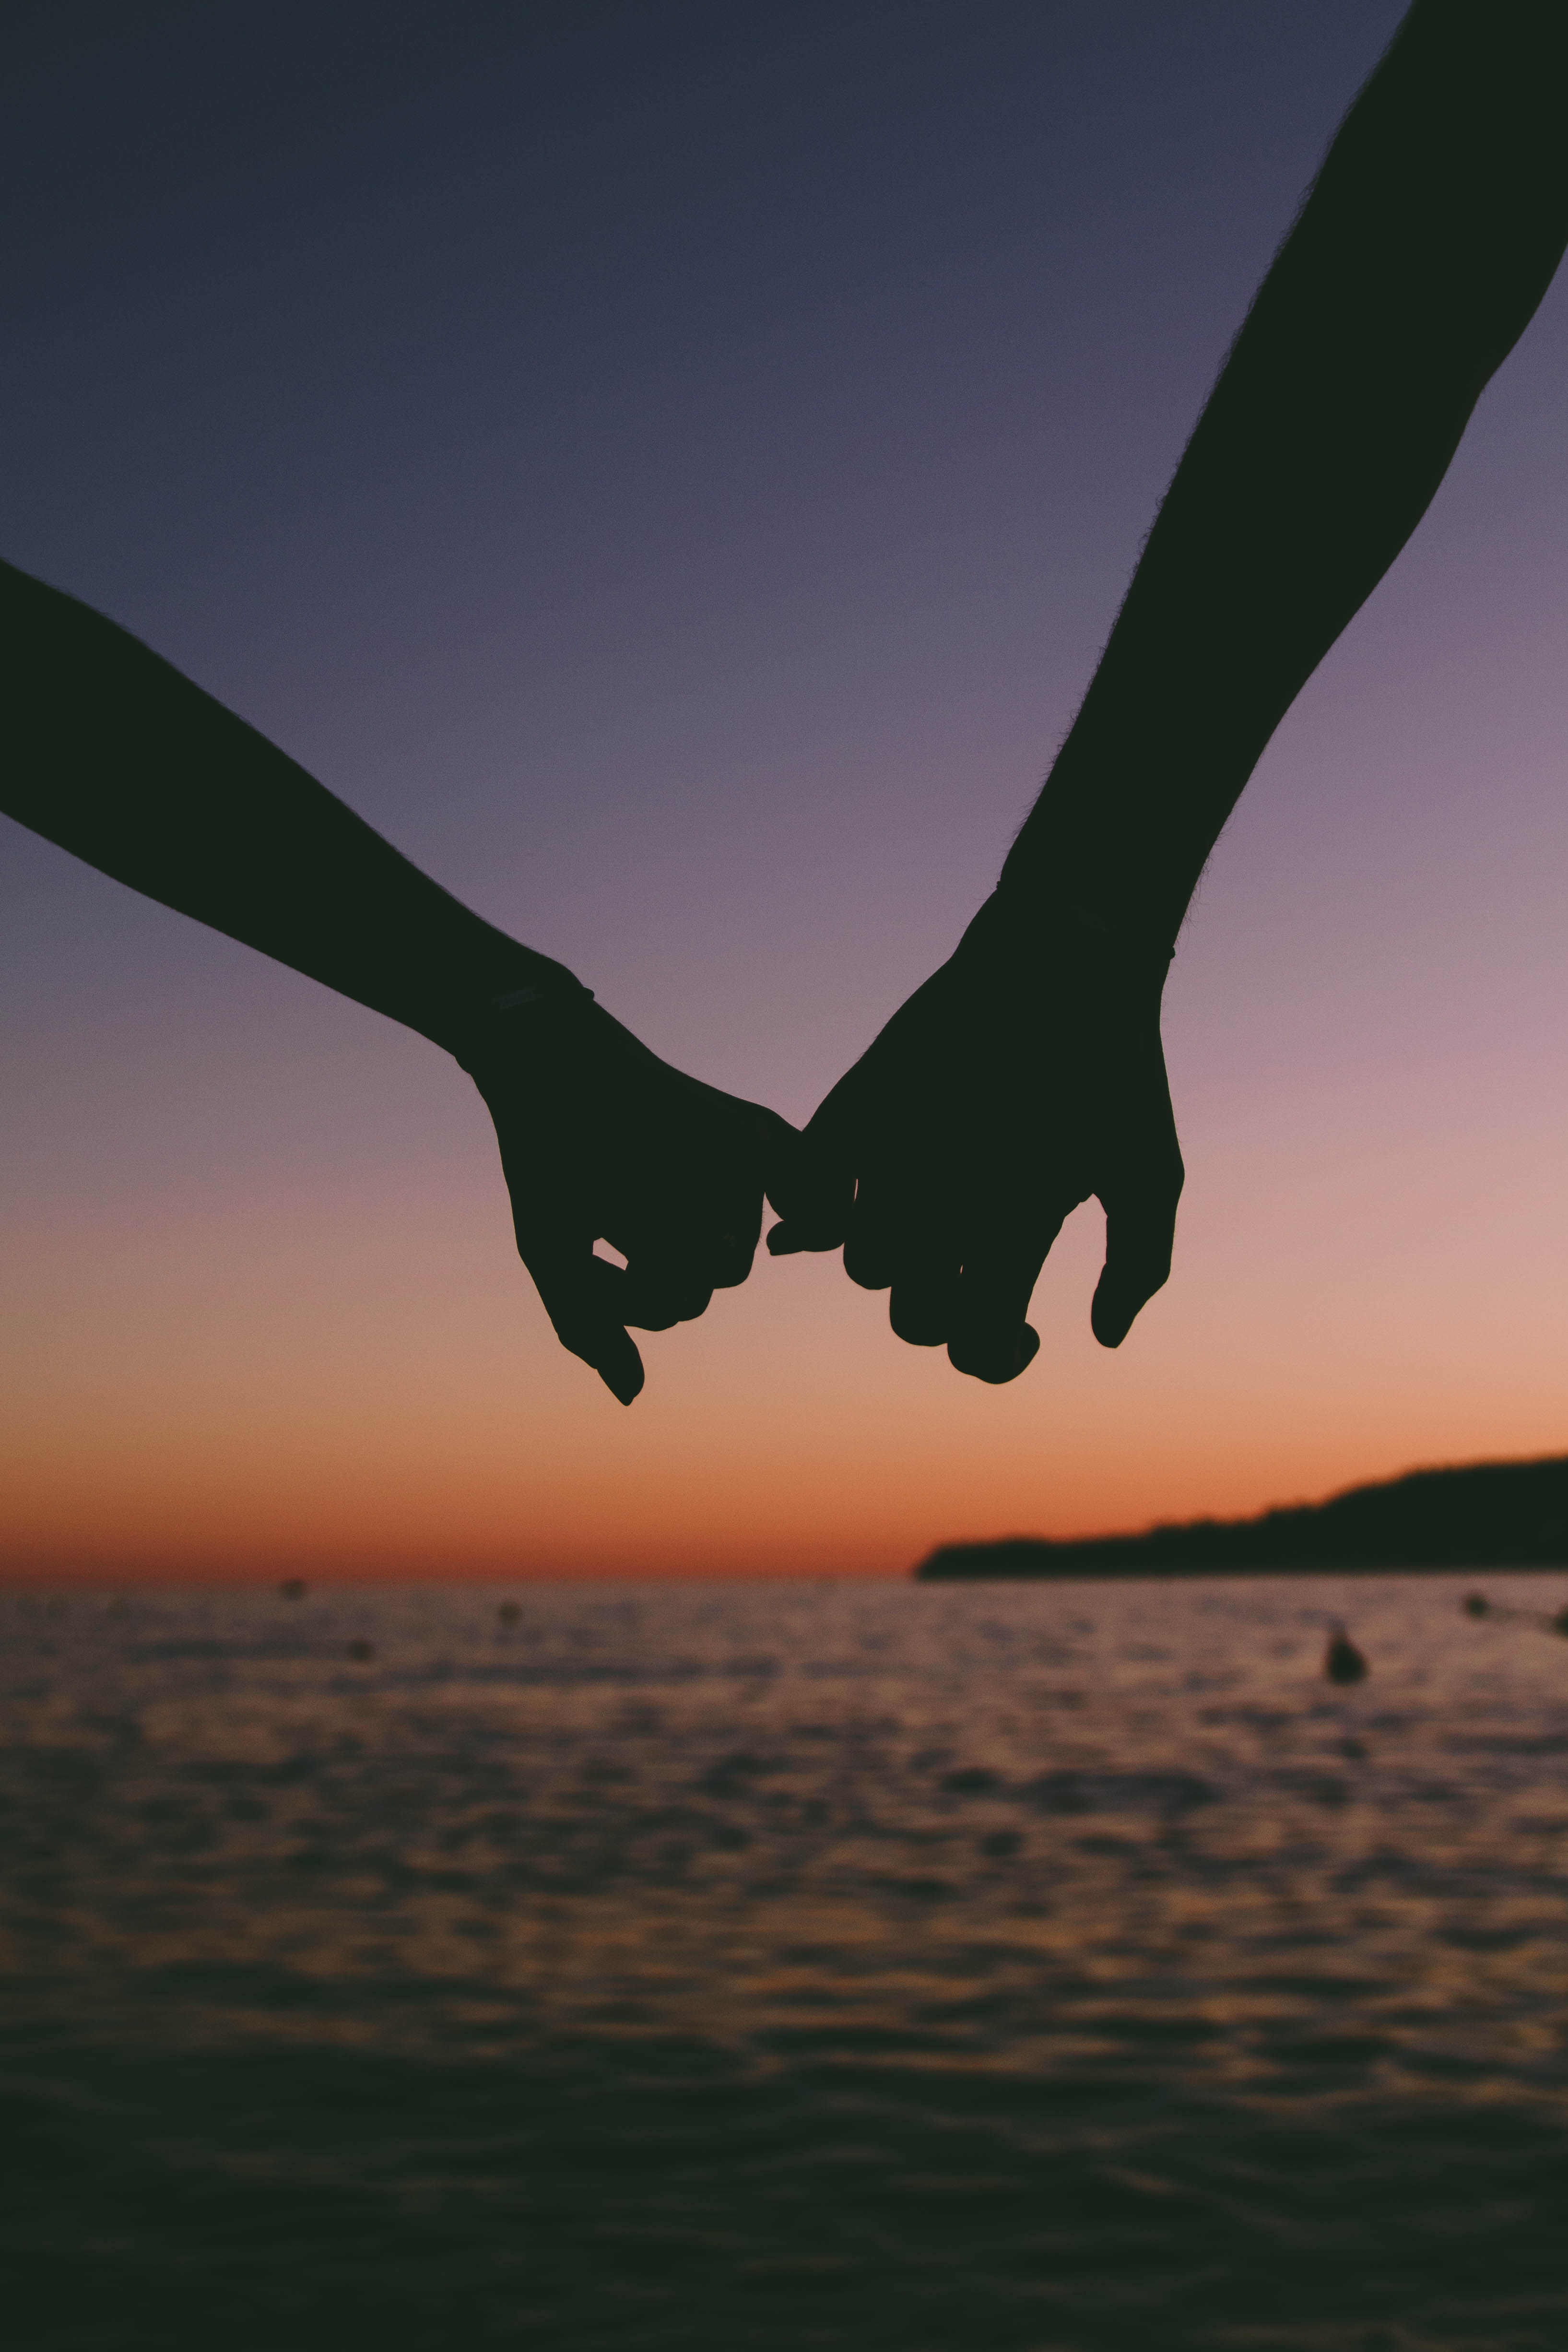 Two Person Holding Pinkies. | Source: Pexels